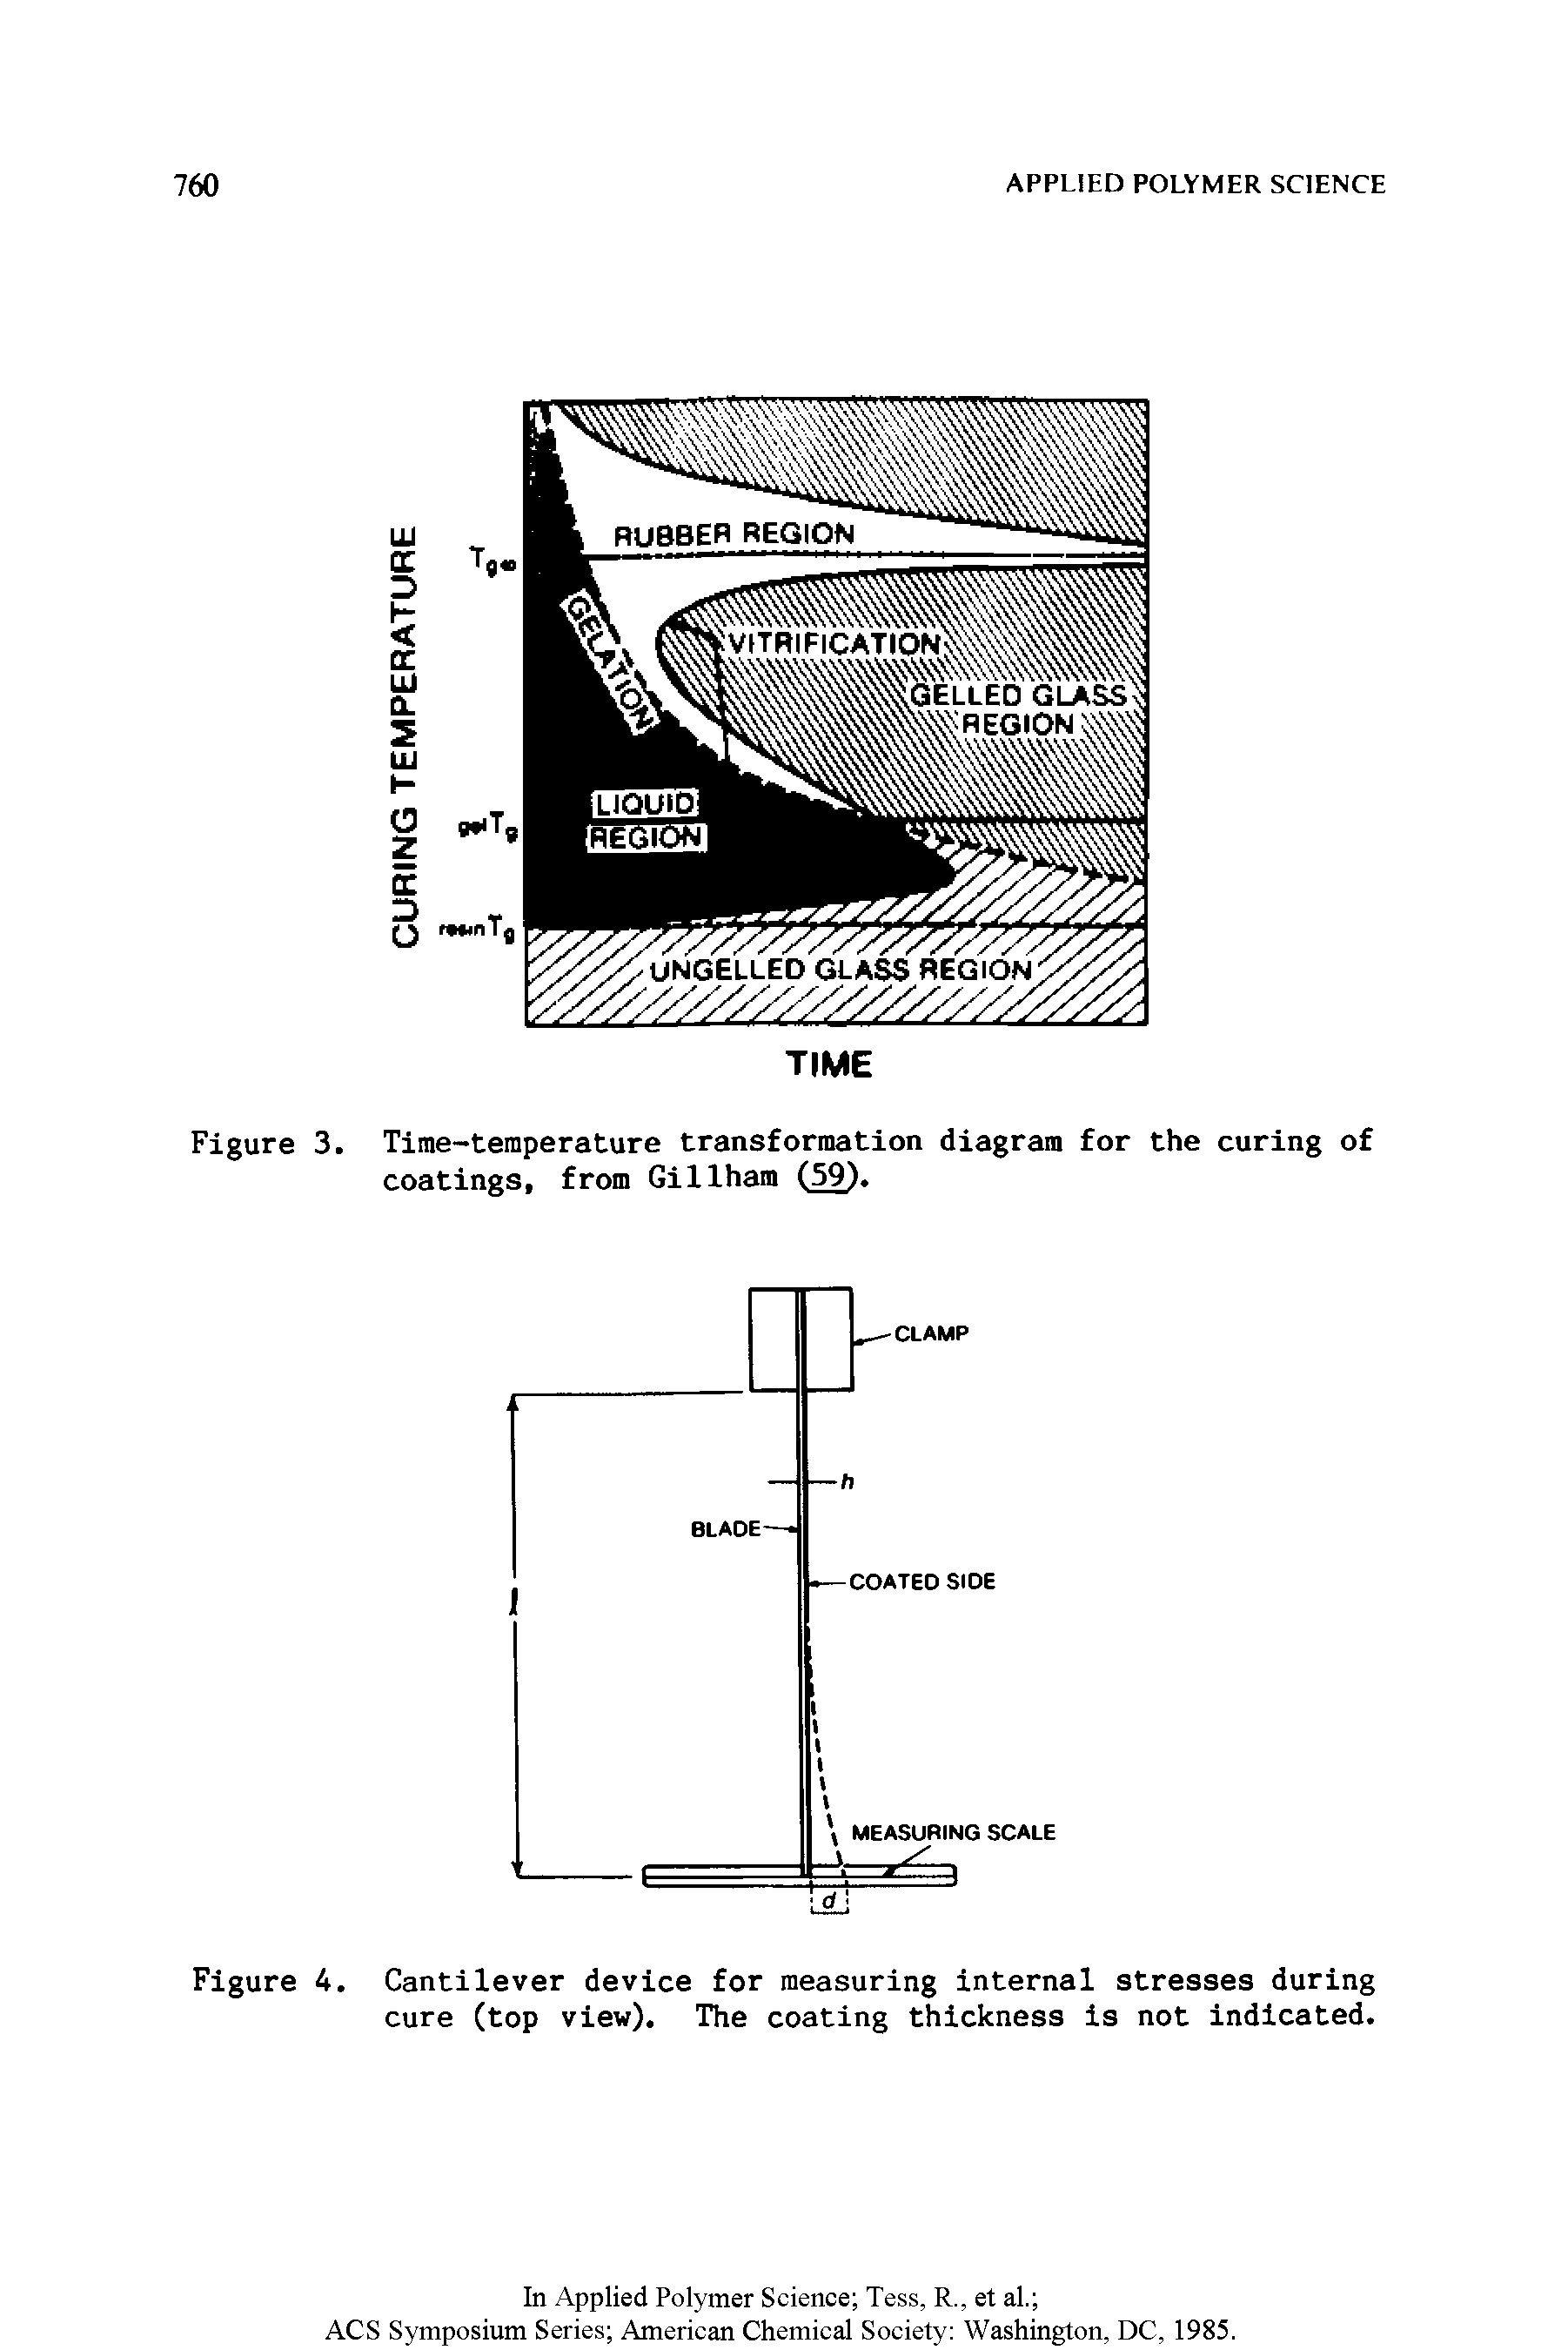 Figure 3. Tirae-teraperature transformation diagram for the curing of coatings, from GiIlham (59).